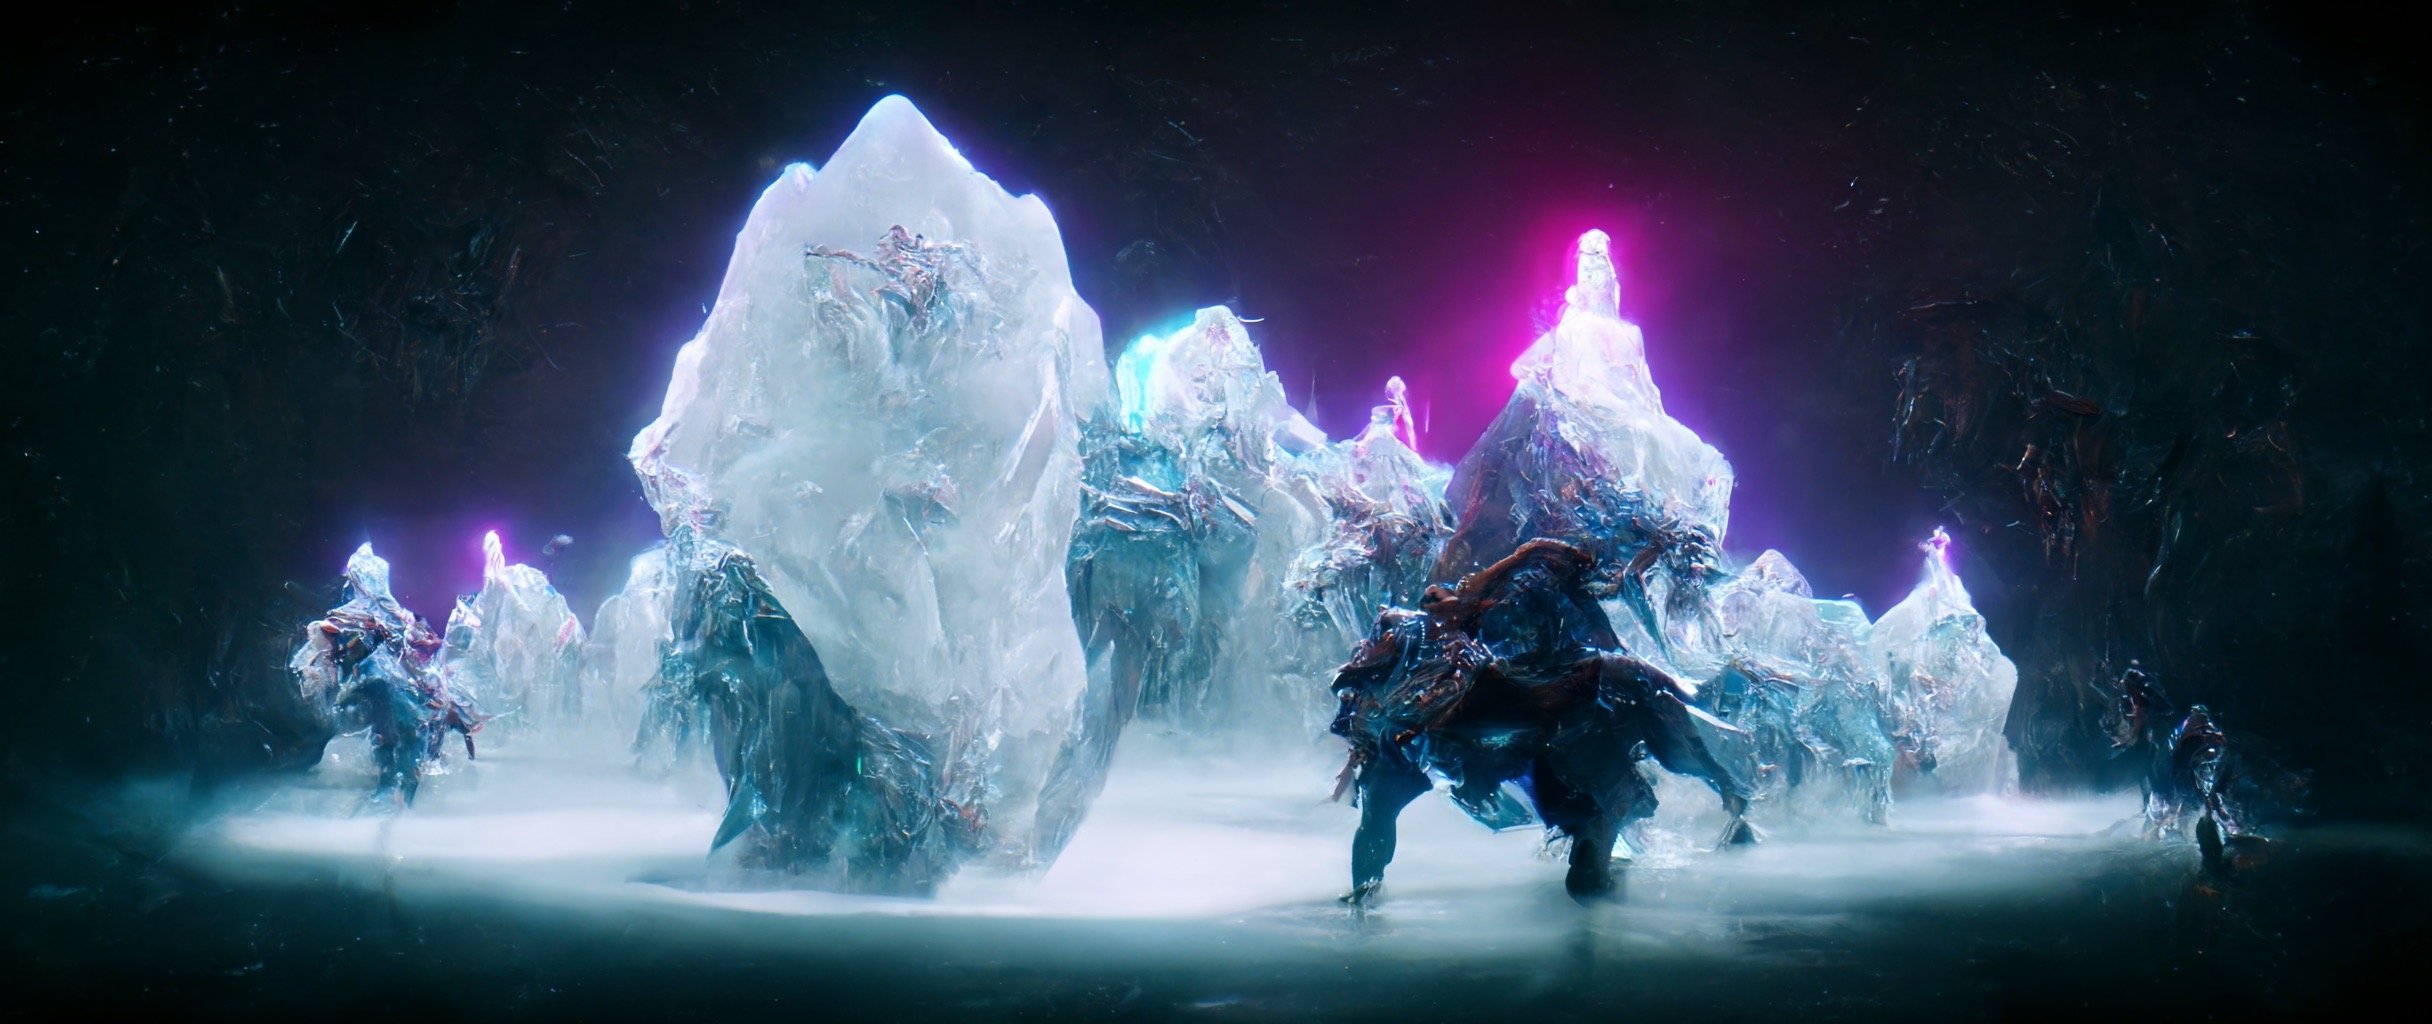 bb89668b-89d3-4df3-9158-c10f45c9134b_S3RAPH_epic_video_game_style_boss_fight_in_mystical_detailed_ice_cave._motion_blur_attack._8k_cinematic_com.JPG